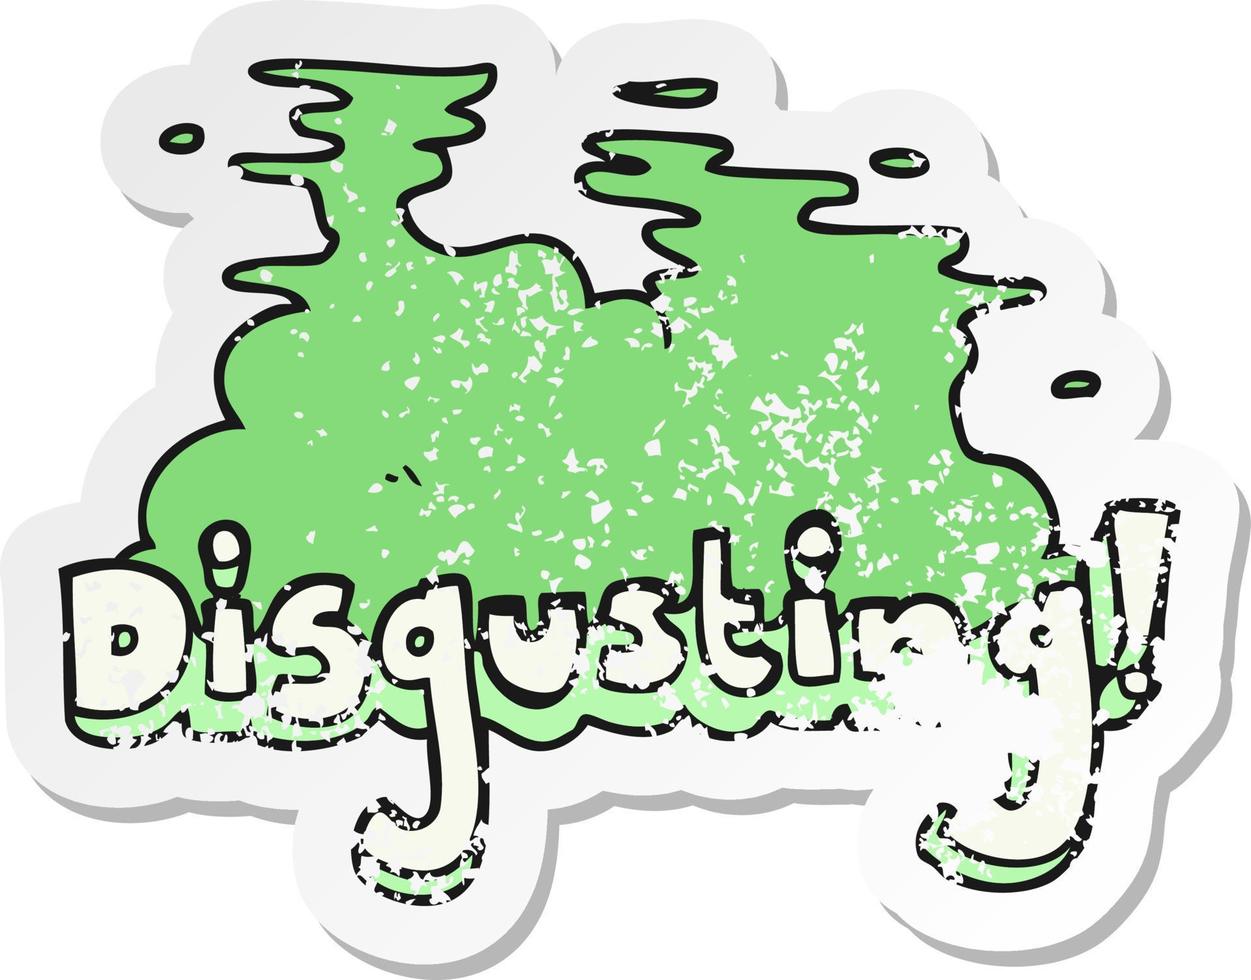 retro distressed sticker of a disgusting cartoon vector